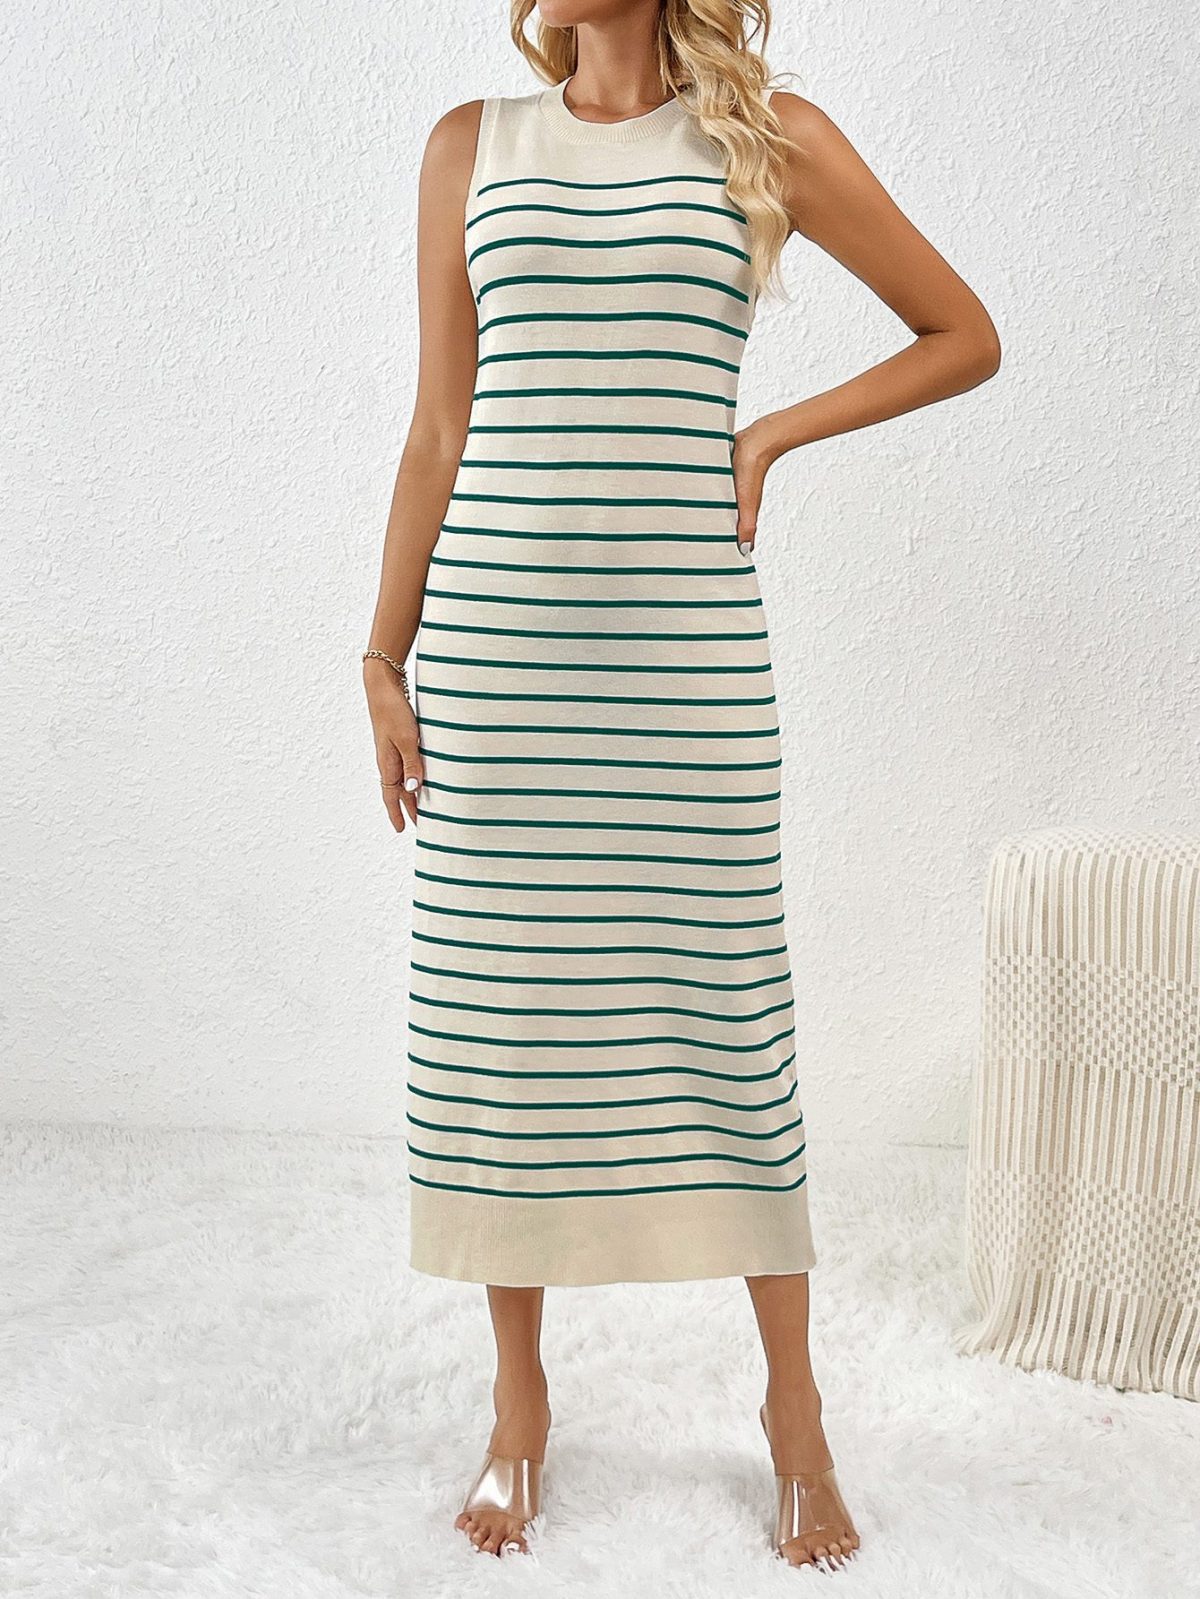 Sleeveless Splicing Pullover Striped Dress in Dresses